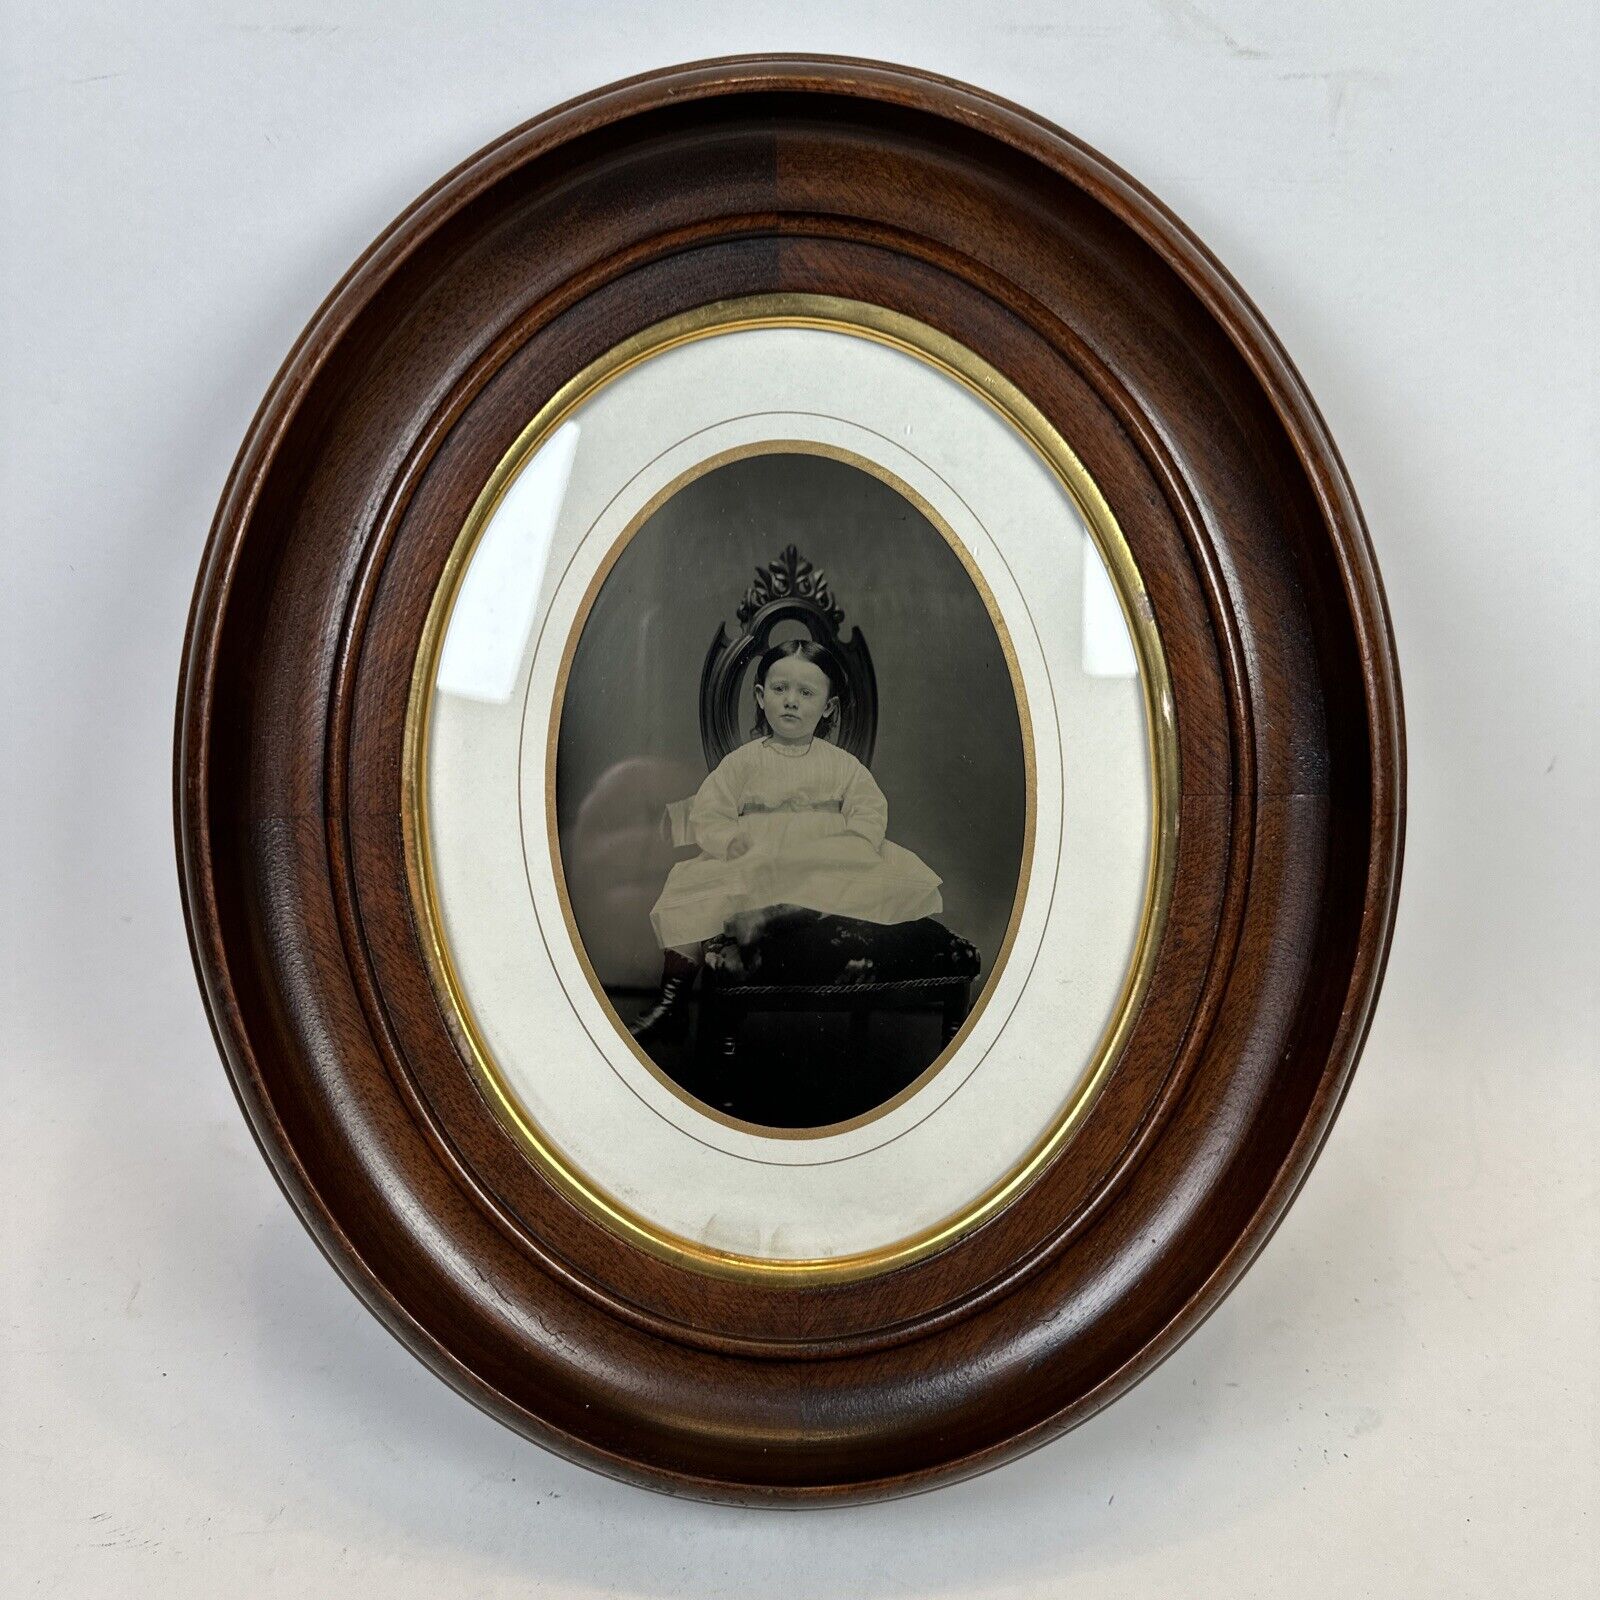 Antique Victorian Oval Wood Framed Photograph Of Child - 11.5” x 13.5”